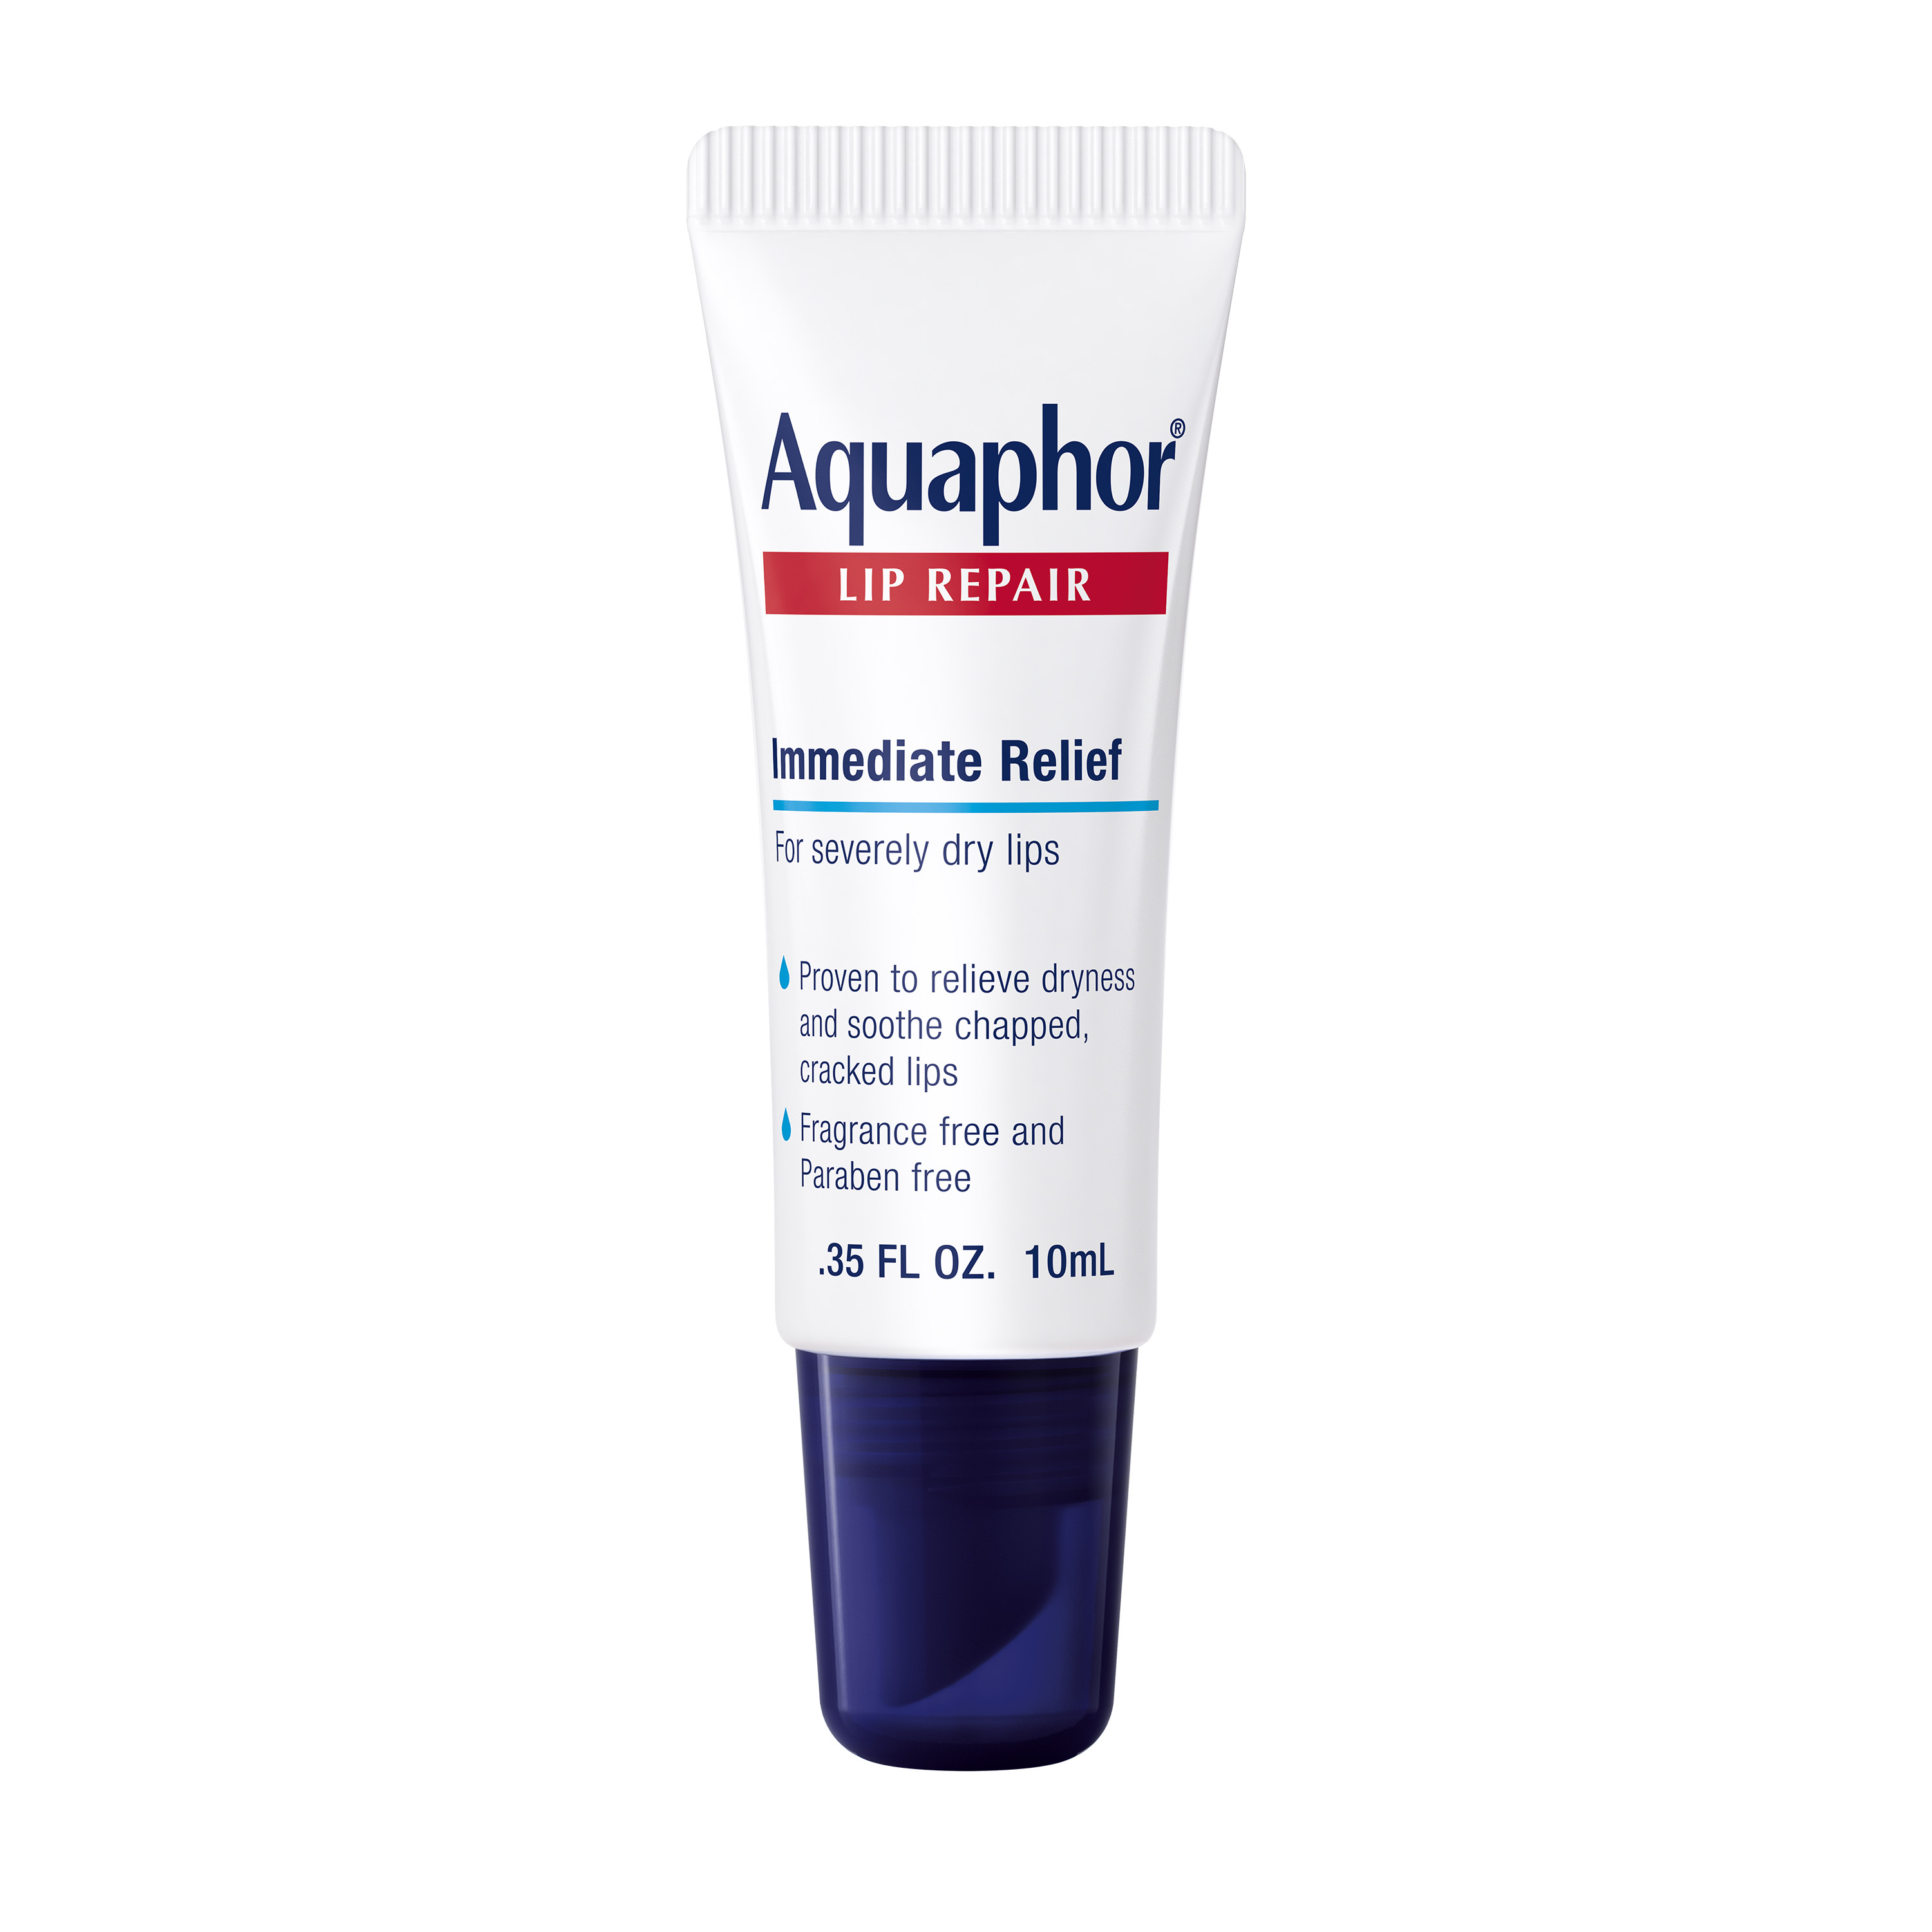 Aquaphor Lip Repair Ointment, Long-lasting Moisture to Soothe Dry Chapped Lips, .35 fl. oz. Tube - image 3 of 9